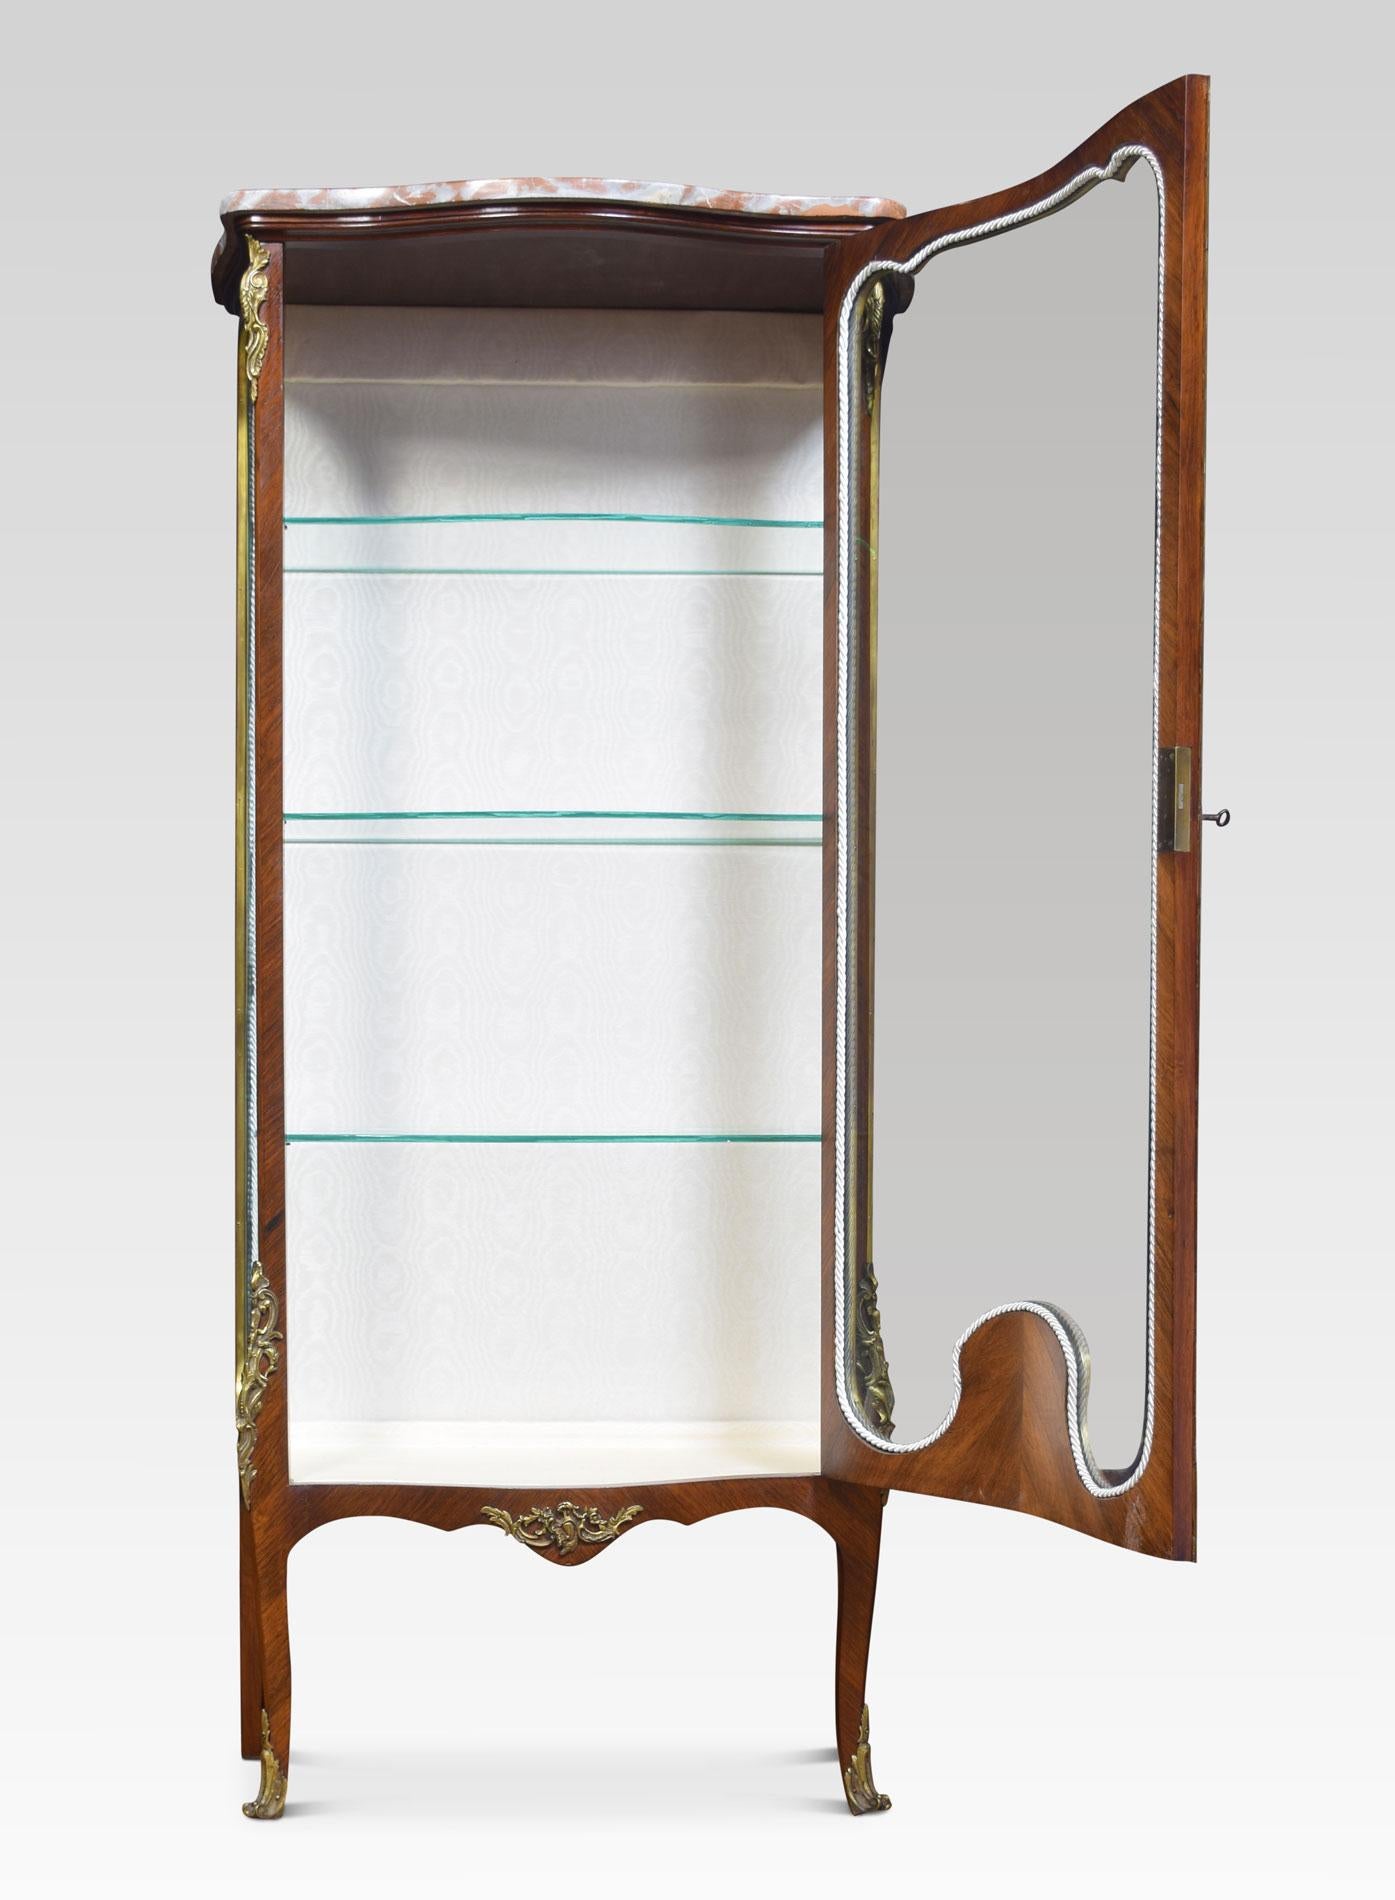 19th-century walnut and marquetry cabinet, the serpentine brocatello marble top above gilt metal mounted door with marquetry inlay. The door opening to reveal an upholsterers interior with three glazed shelves. All raised up on four cabriole legs